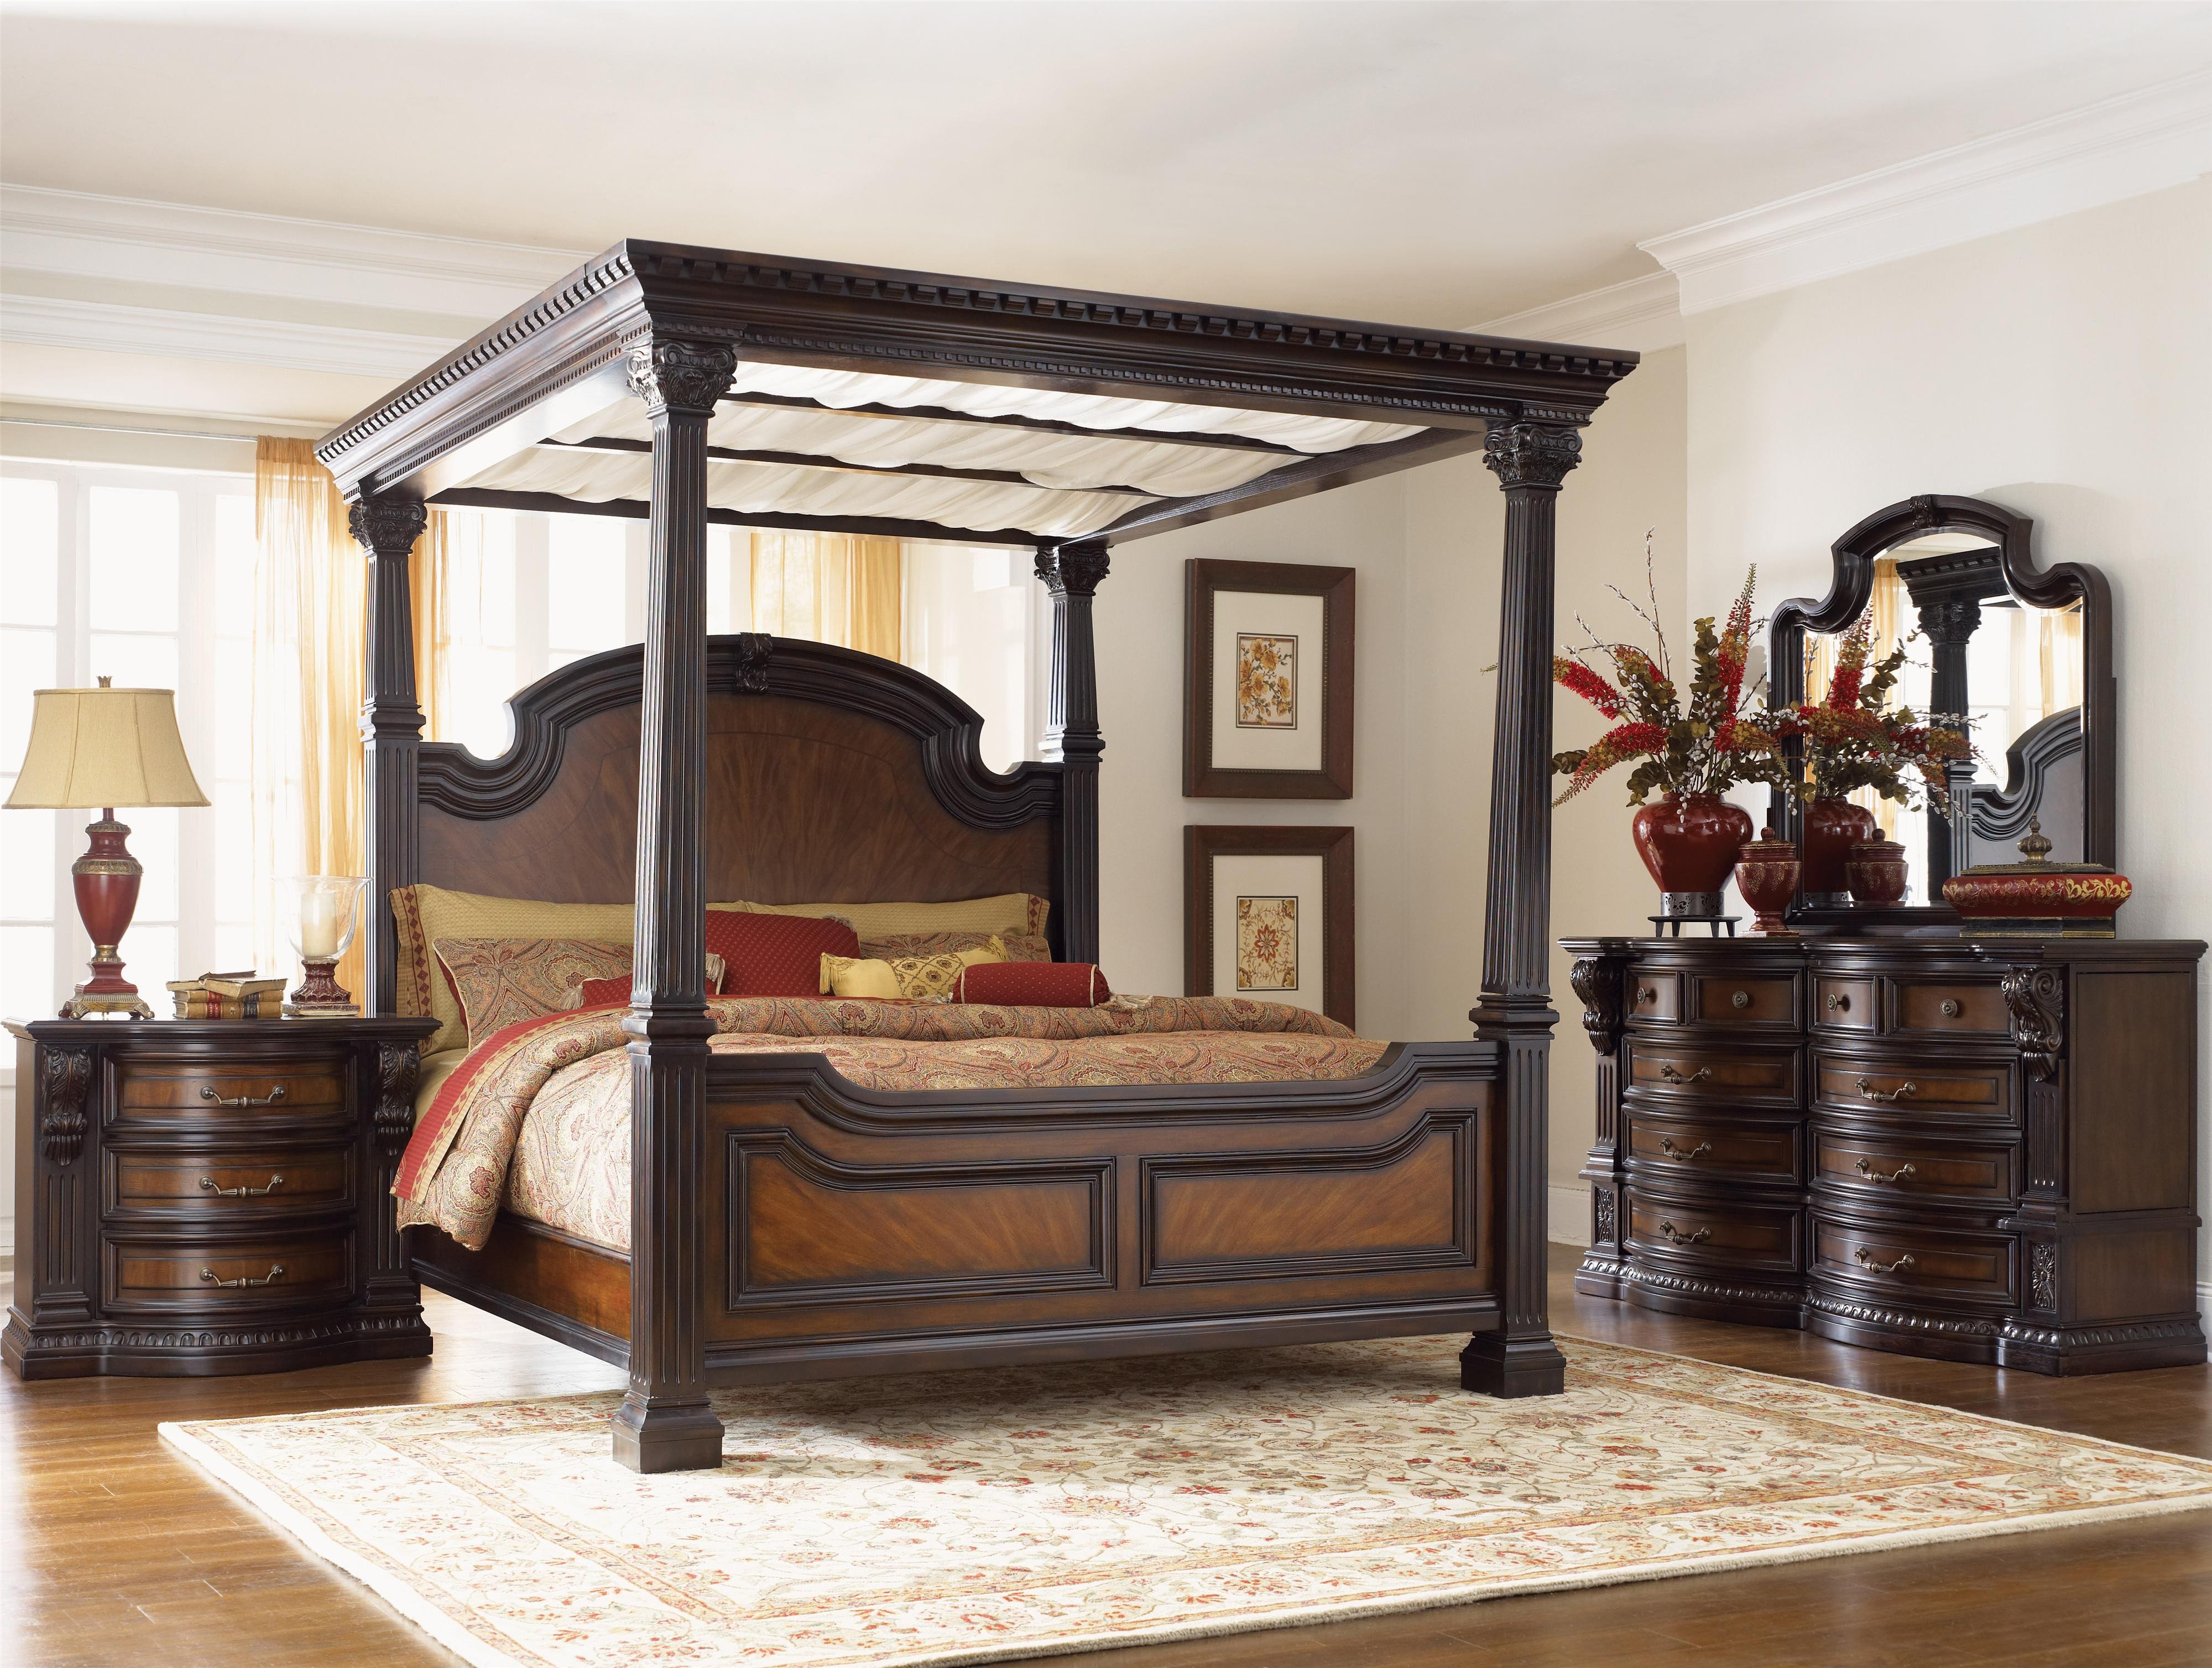 Bedroom Furniture Sale Clearance Fresh Grand Estates 02 by Fairmont Designs Royal Furniture